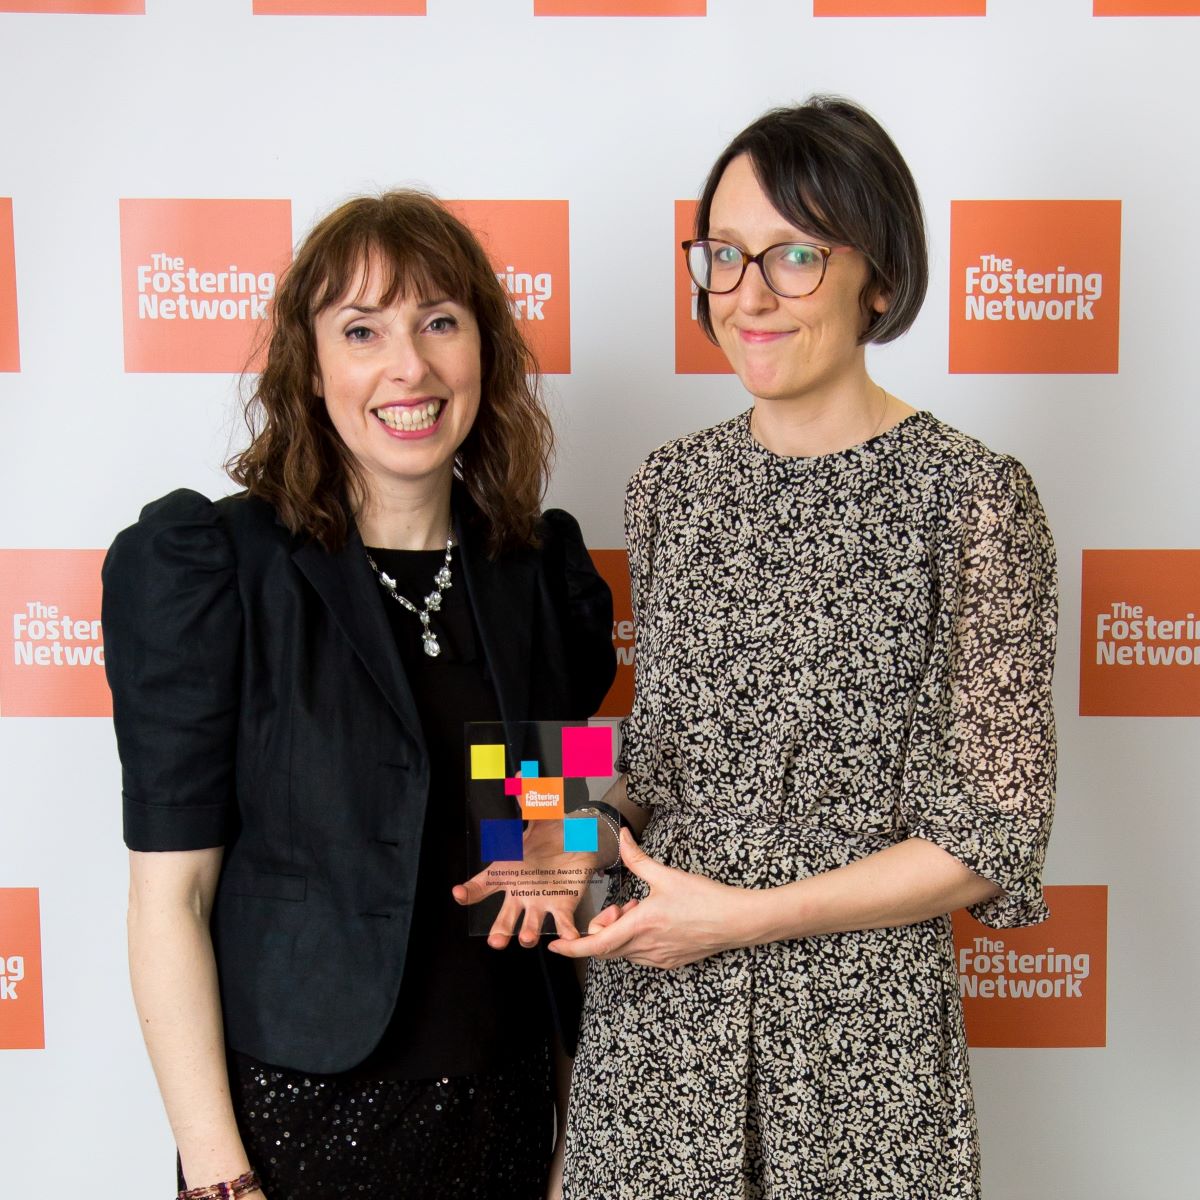 Fostering excellence awards 2022 - Victoria Cumming (right) with her award with Angela Leask